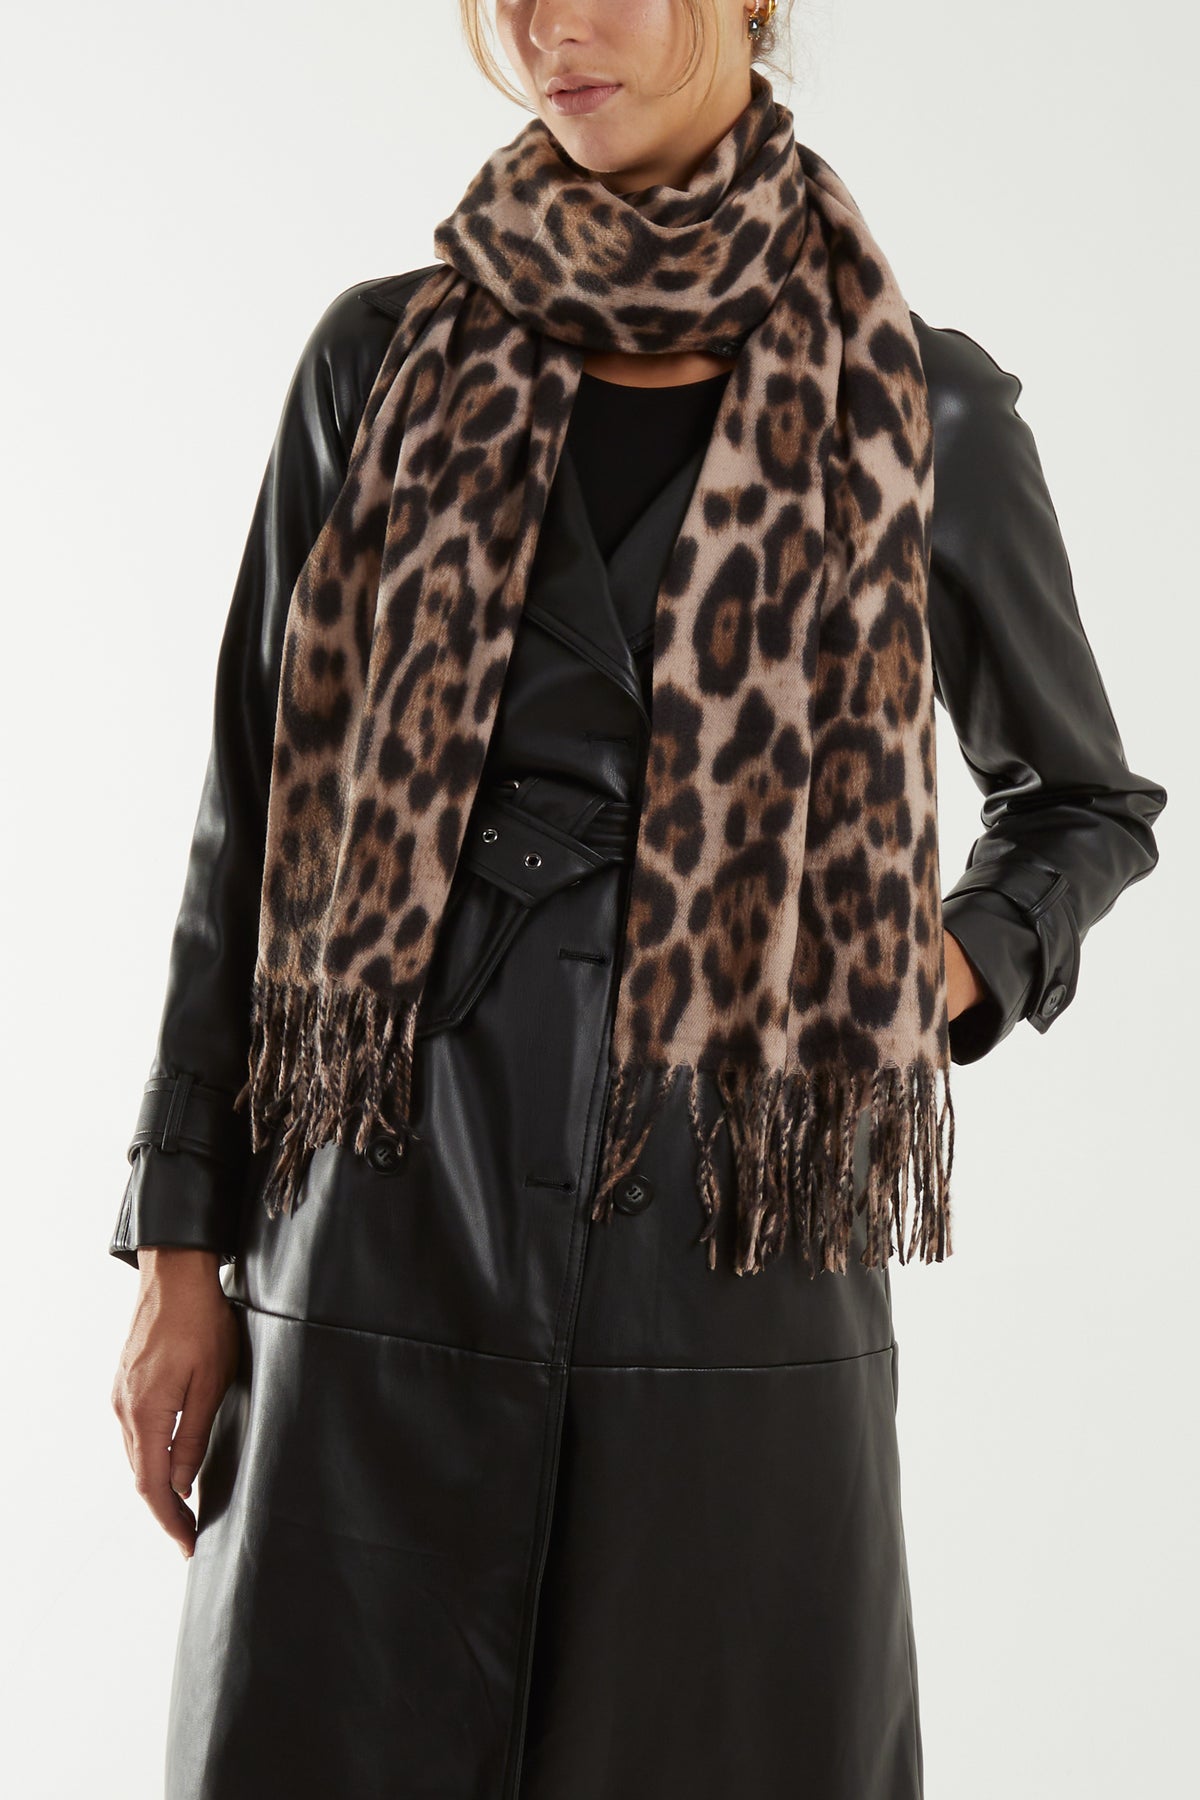 Leopard Print Soft Touch Scarf